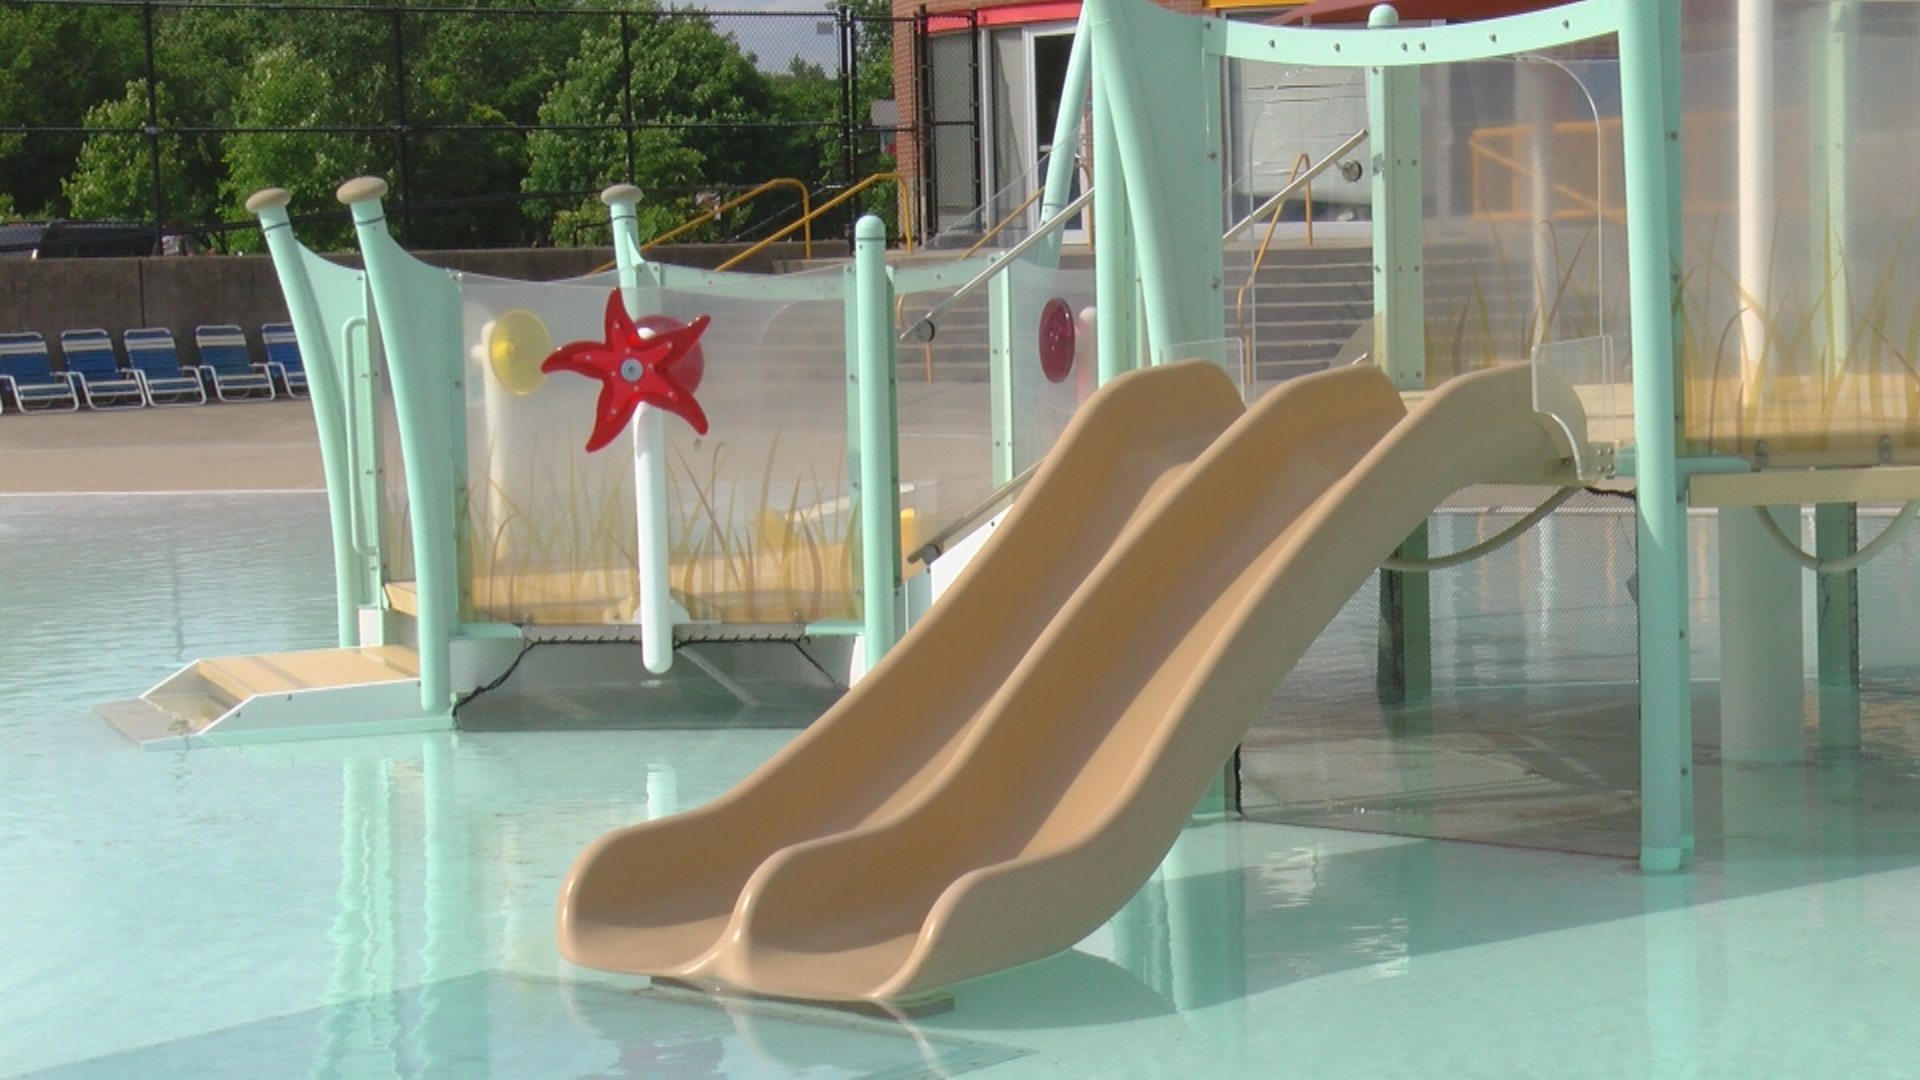 Indy Parks still needs to hire 119 lifeguards